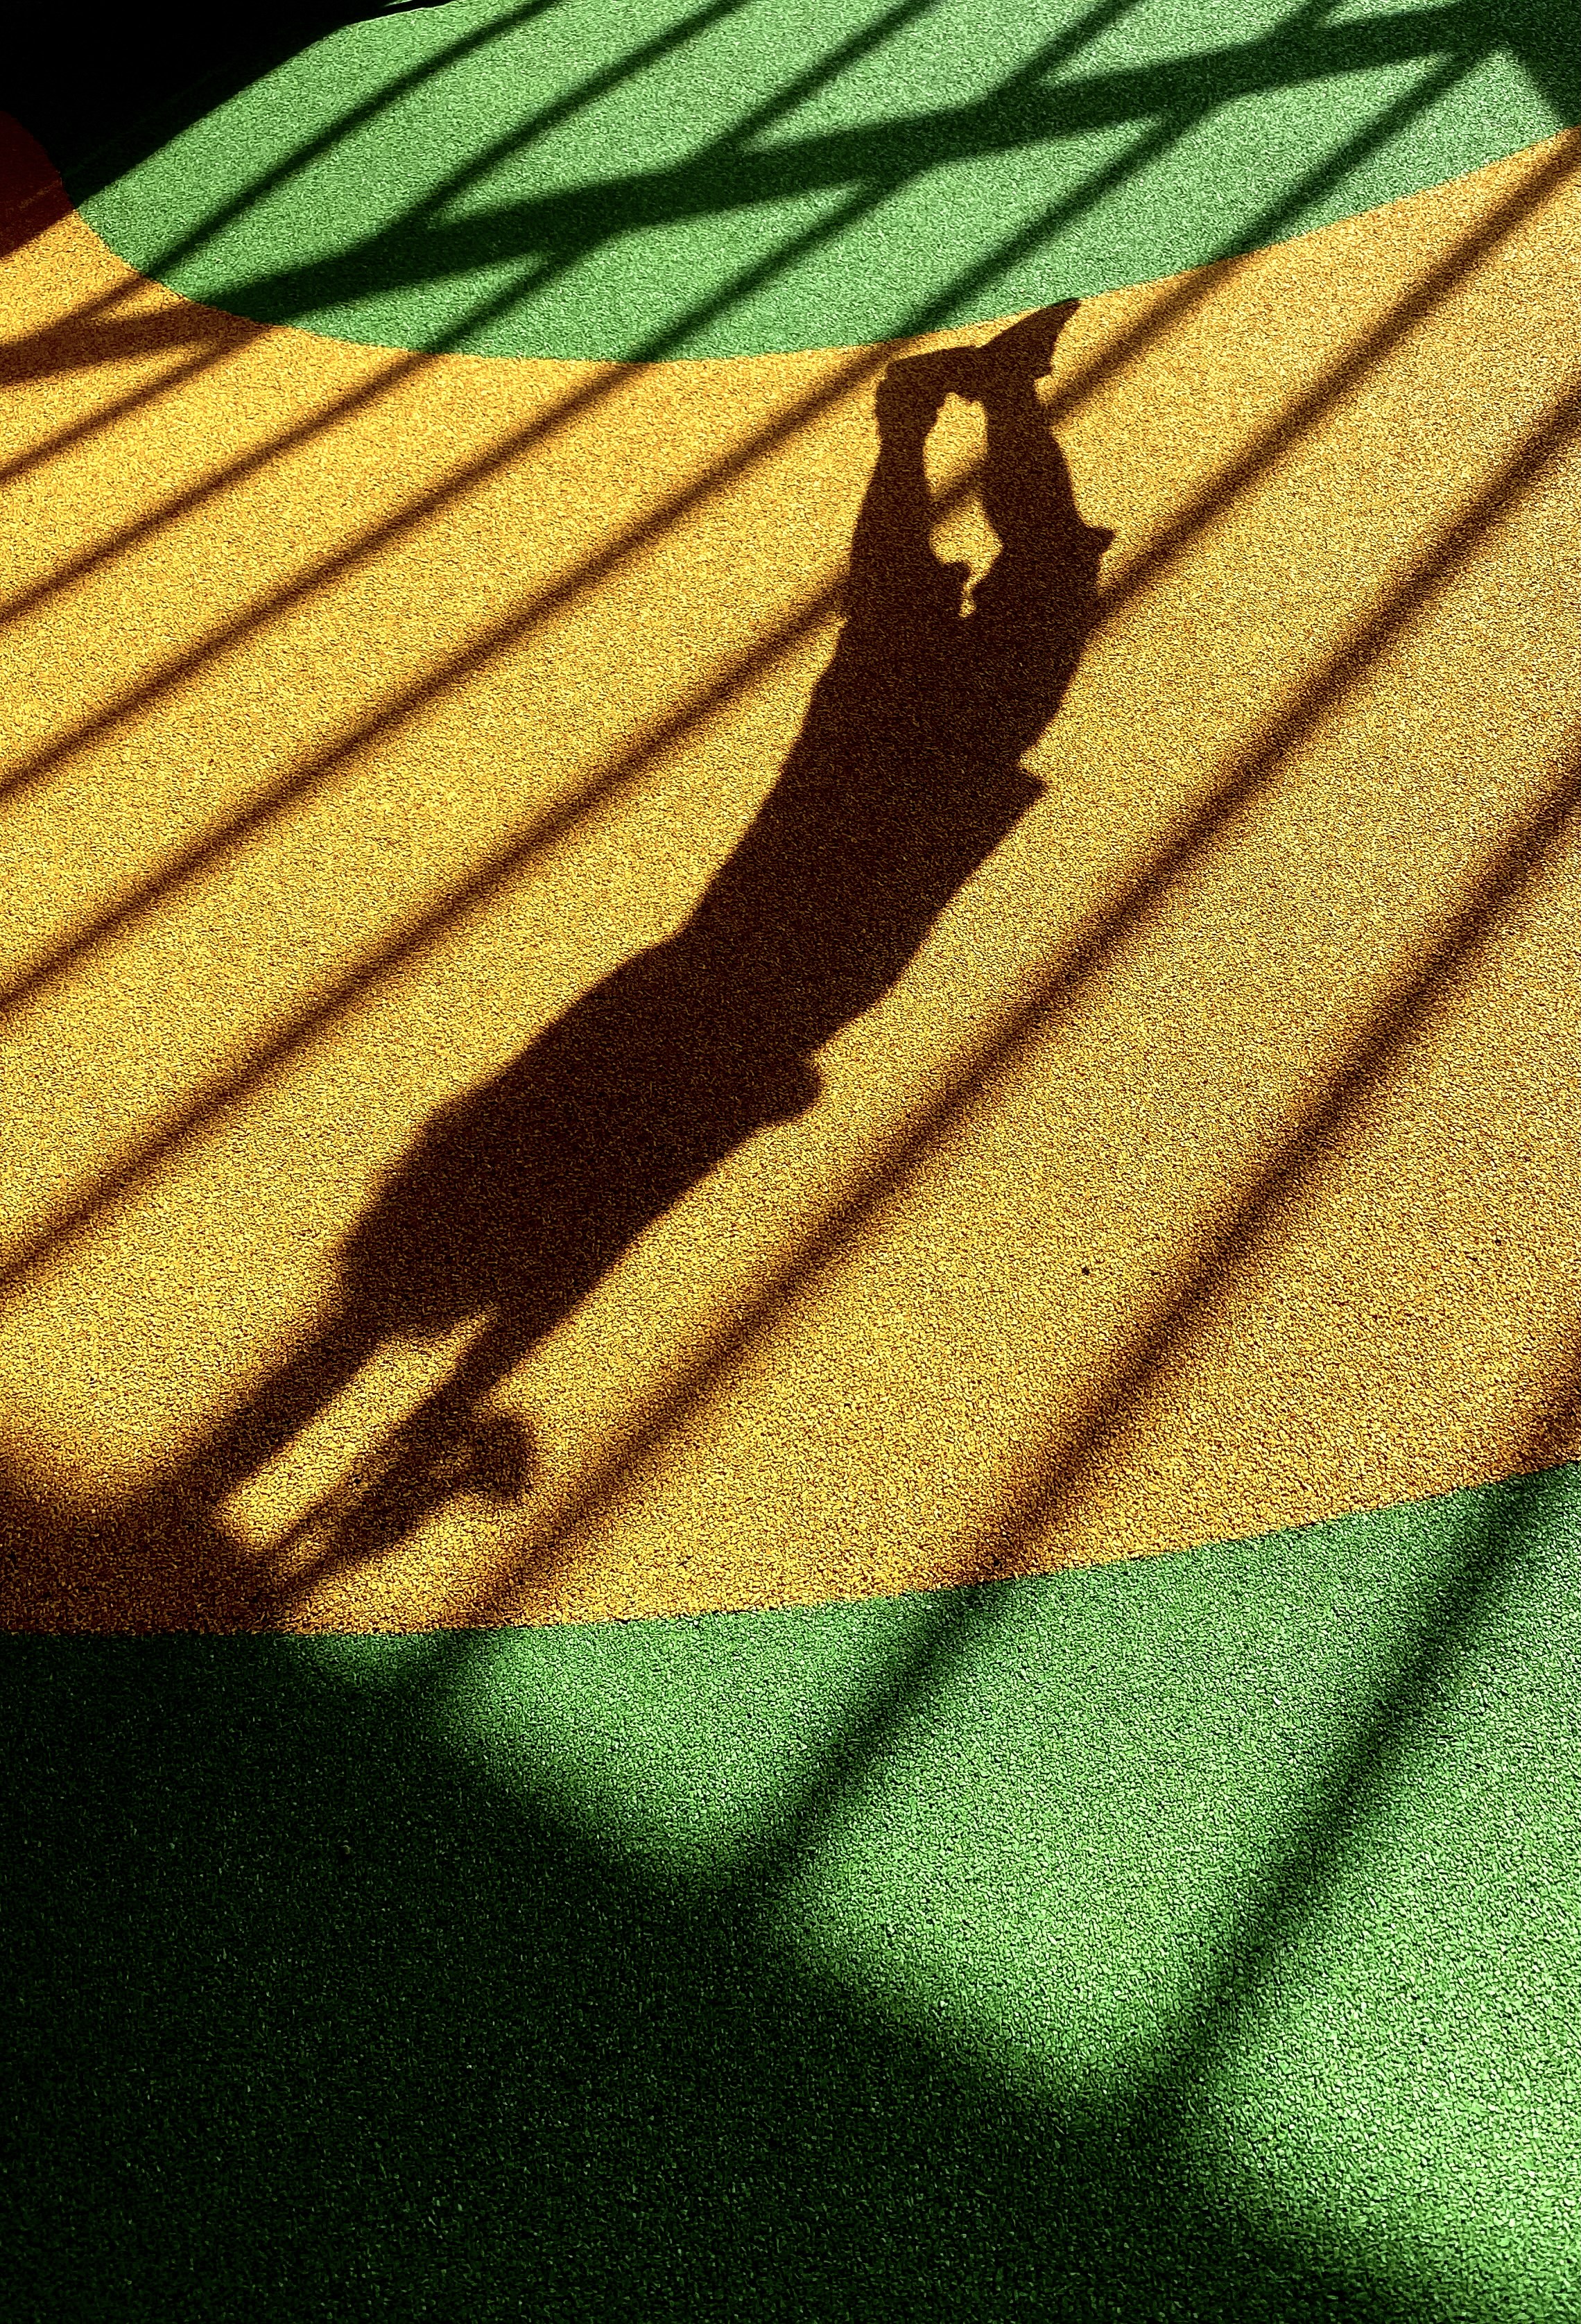 An abstract photograph of a basketball court